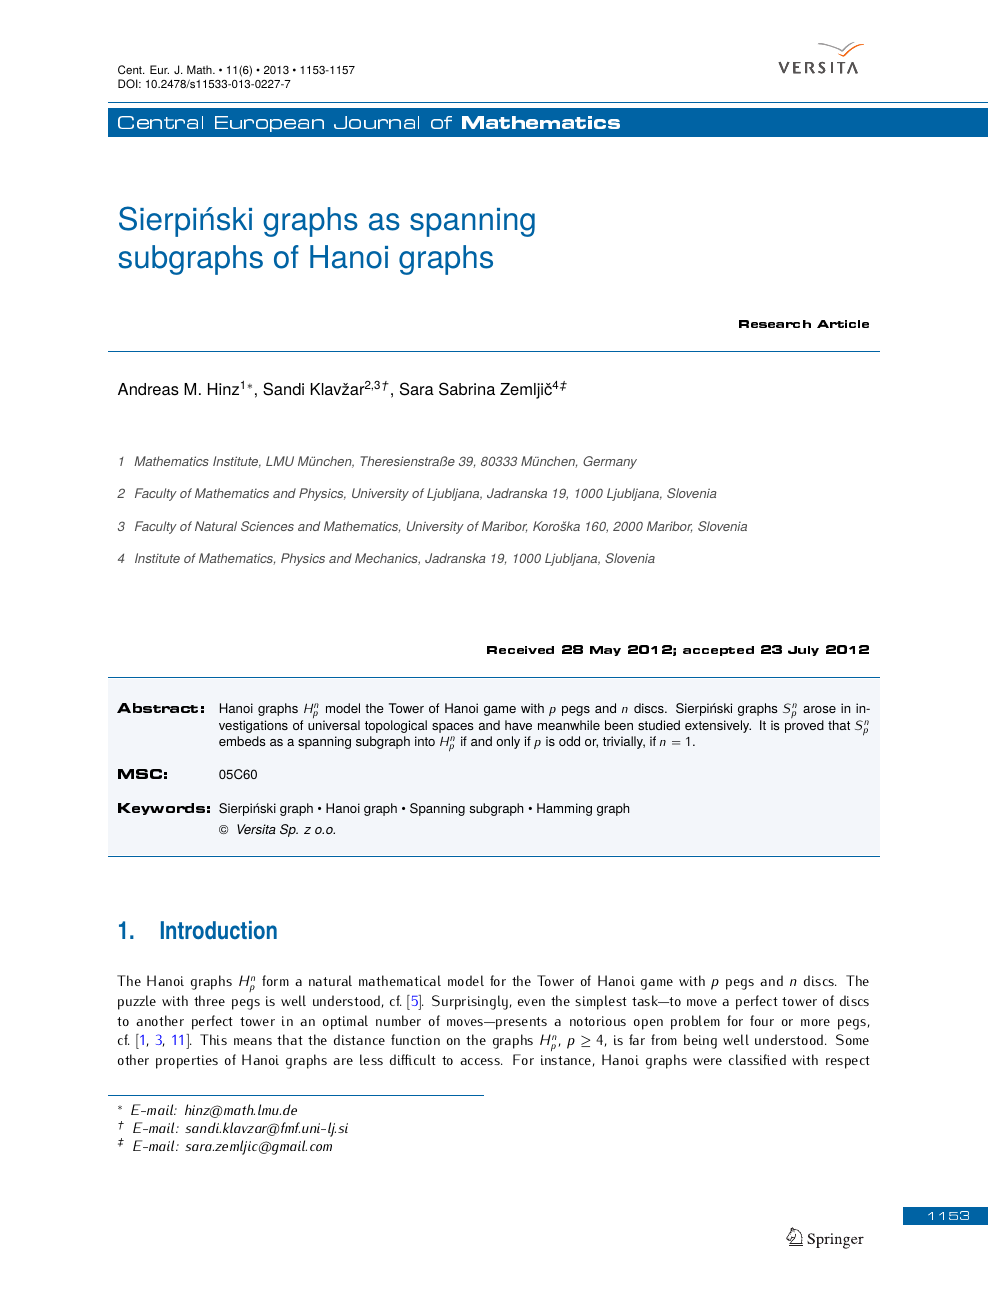 Sierpinski Graphs As Spanning Subgraphs Of Hanoi Graphs Topic Of Research Paper In Mathematics Download Scholarly Article Pdf And Read For Free On Cyberleninka Open Science Hub